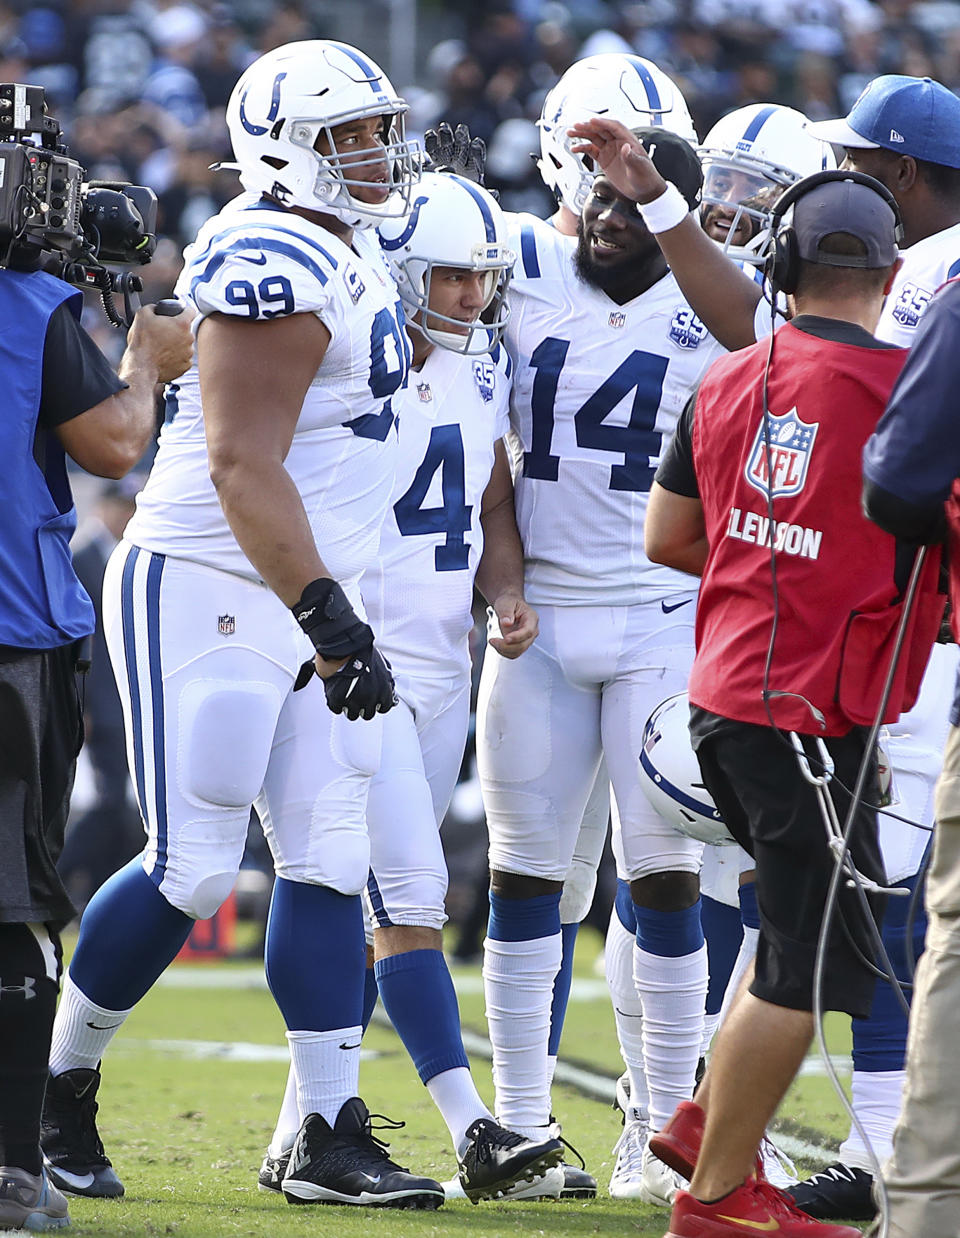 Indianapolis Colts kicker Adam Vinatieri (4) celebrates with teammates after kicking a field goal against the Oakland Raiders during the first half of an NFL football game in Oakland, Calif., Sunday, Oct. 28, 2018. Vinatieri surpassed Morten Andersen's NFL record for points with this kick. (AP Photo/Ben Margot)